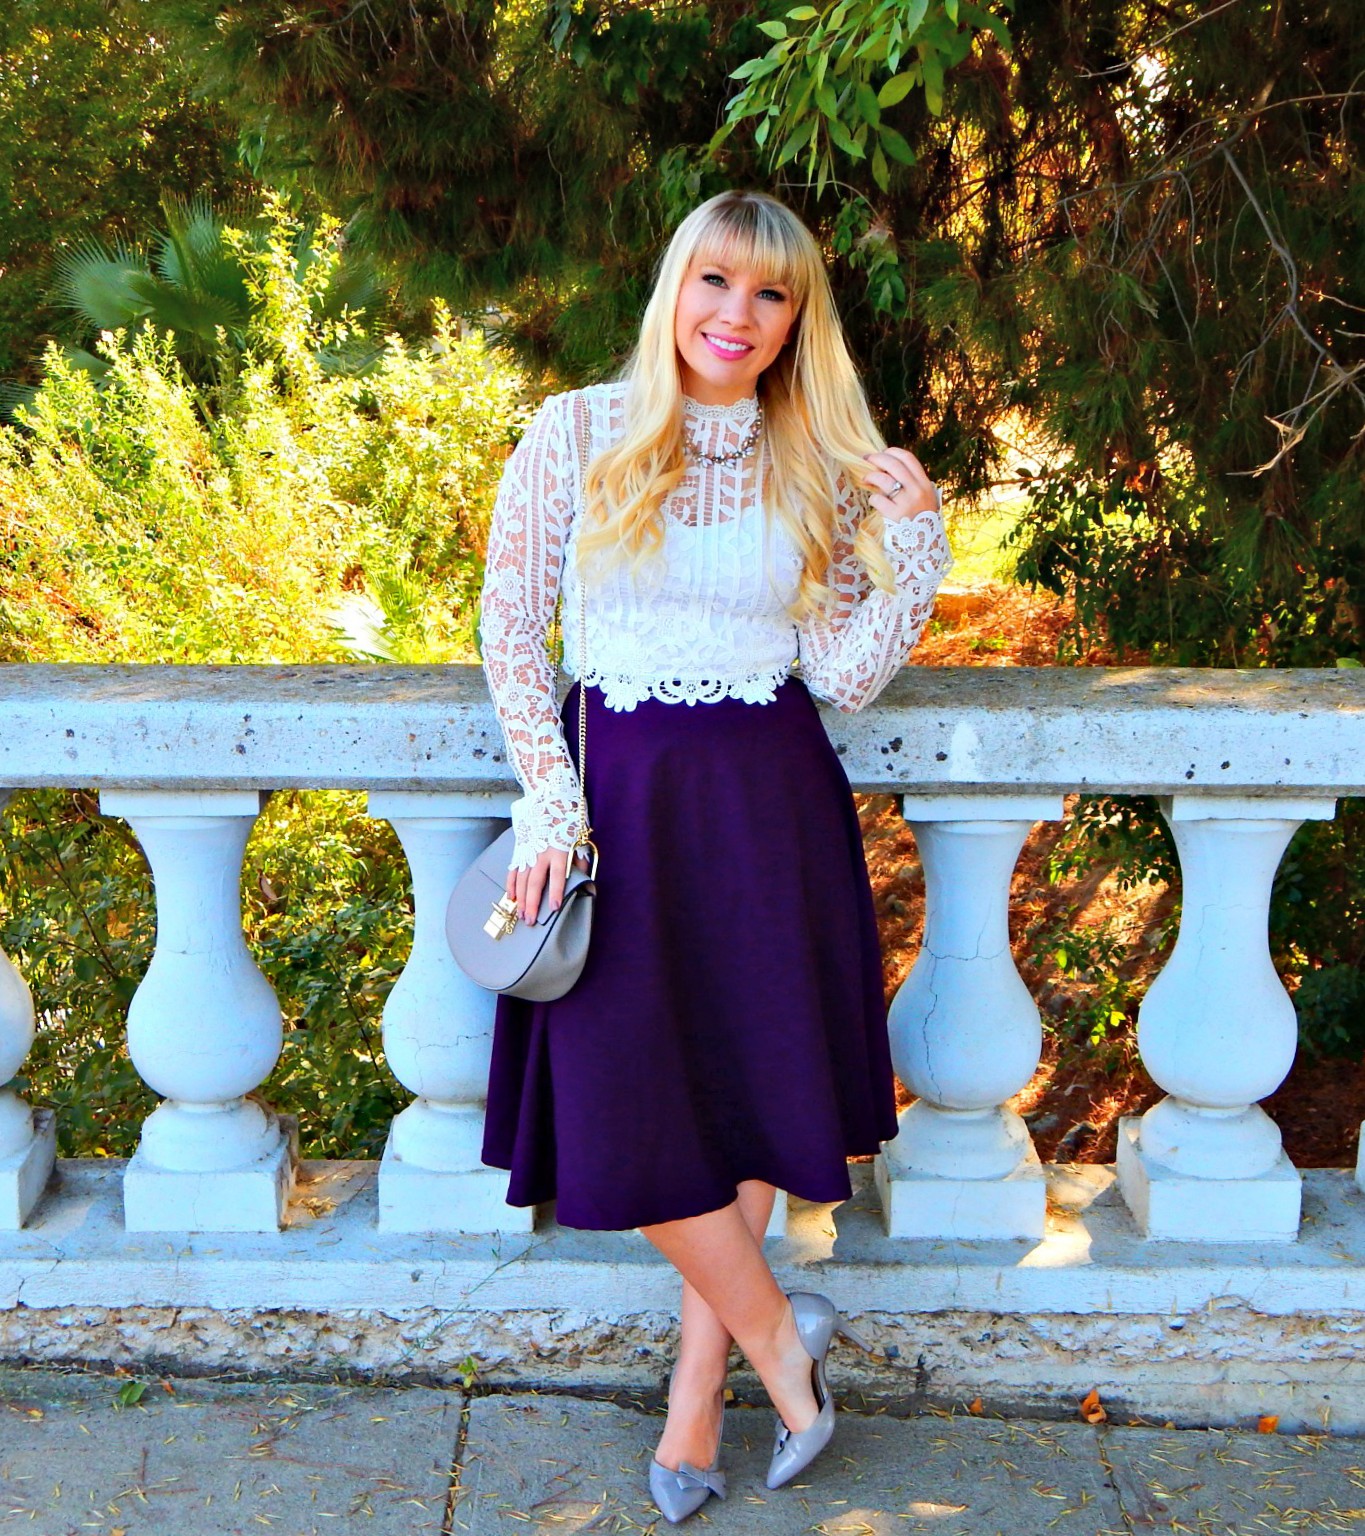 Girly Lace Outfit for Fall